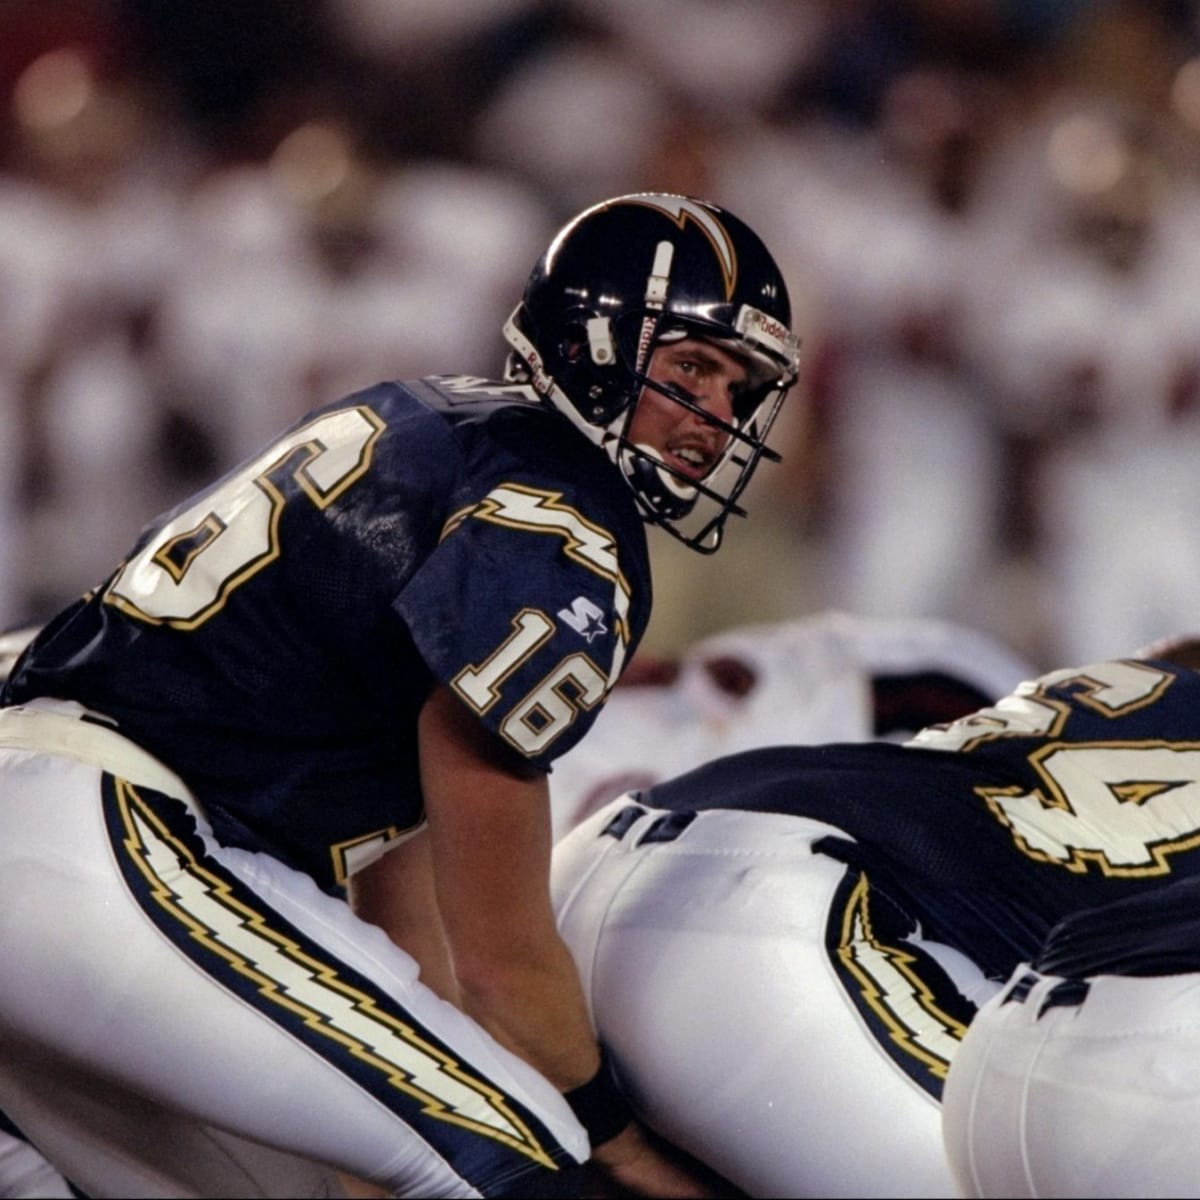 The 1998 NFL Draft: A Look Back at the Epic Ryan Leaf Bust